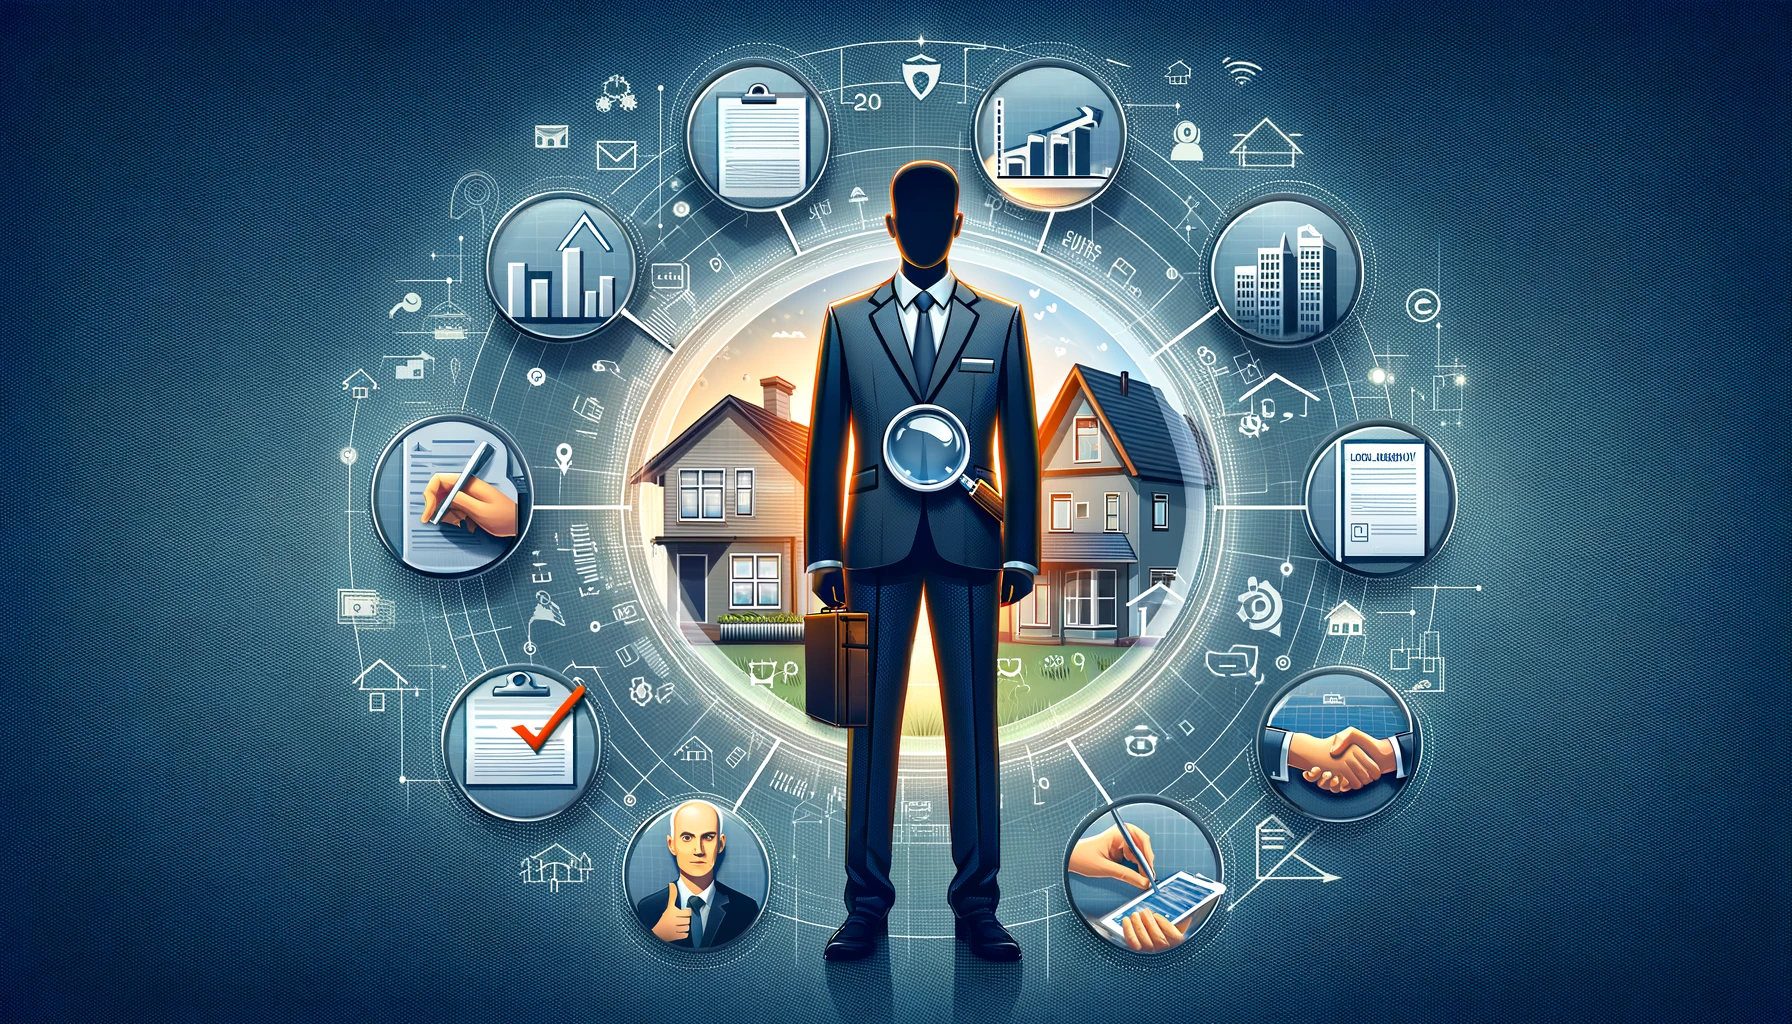 An infographic showcasing a professional real estate agent at the center of various symbolic icons, including a magnifying glass over a house, a graph, legal documents, and a handshake, representing their multifaceted roles in property evaluation, market analysis, legal advising, and negotiations in the housing market.